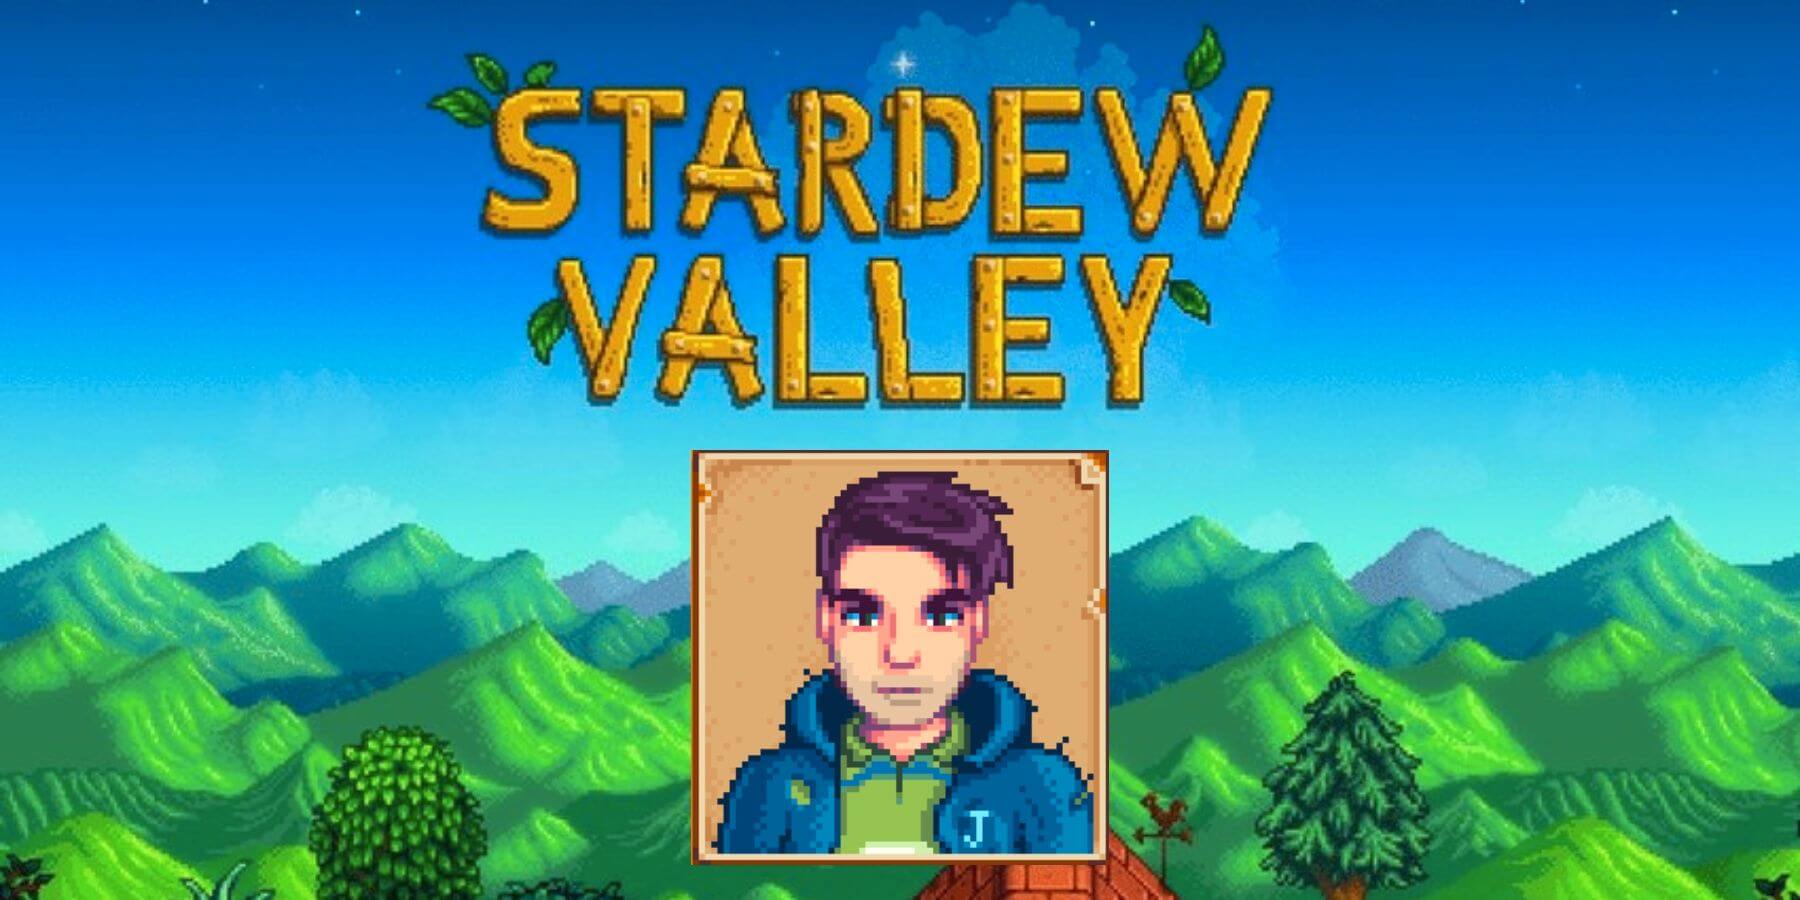 Shane Stardew Valley Guide to Marrying Shane in Stardew Valley, Shane’s Heart Events